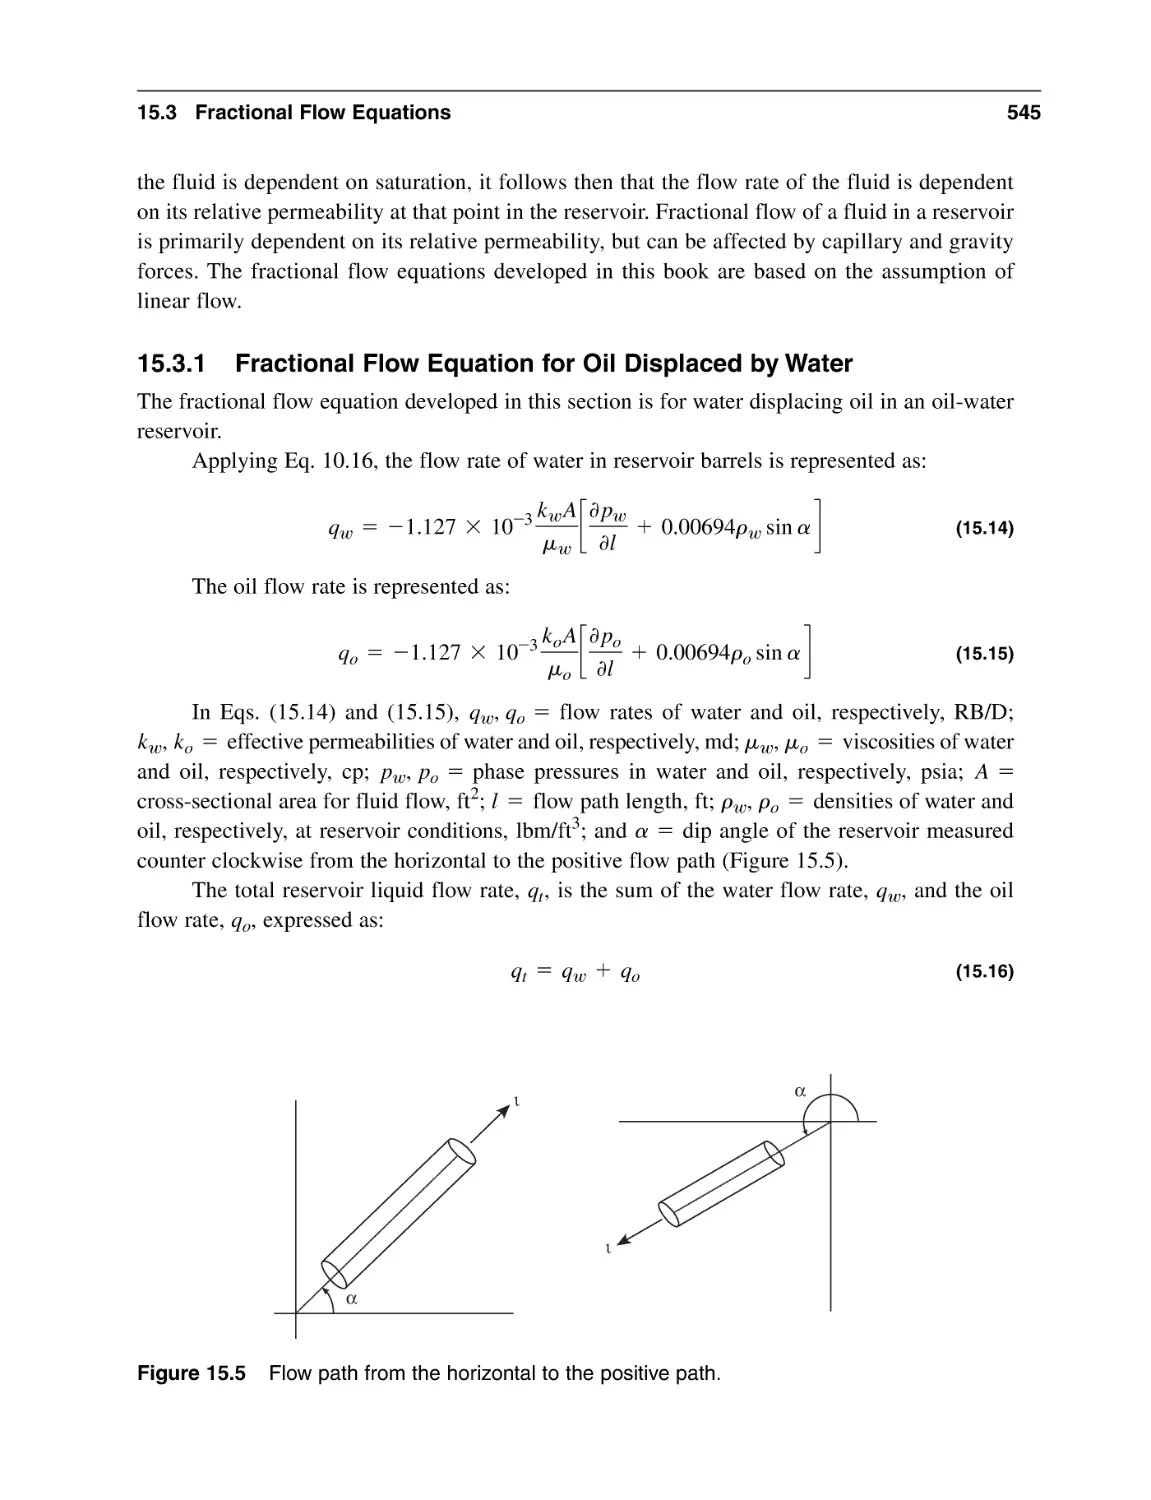 15.3.1 Fractional Flow Equation for Oil Displaced by Water